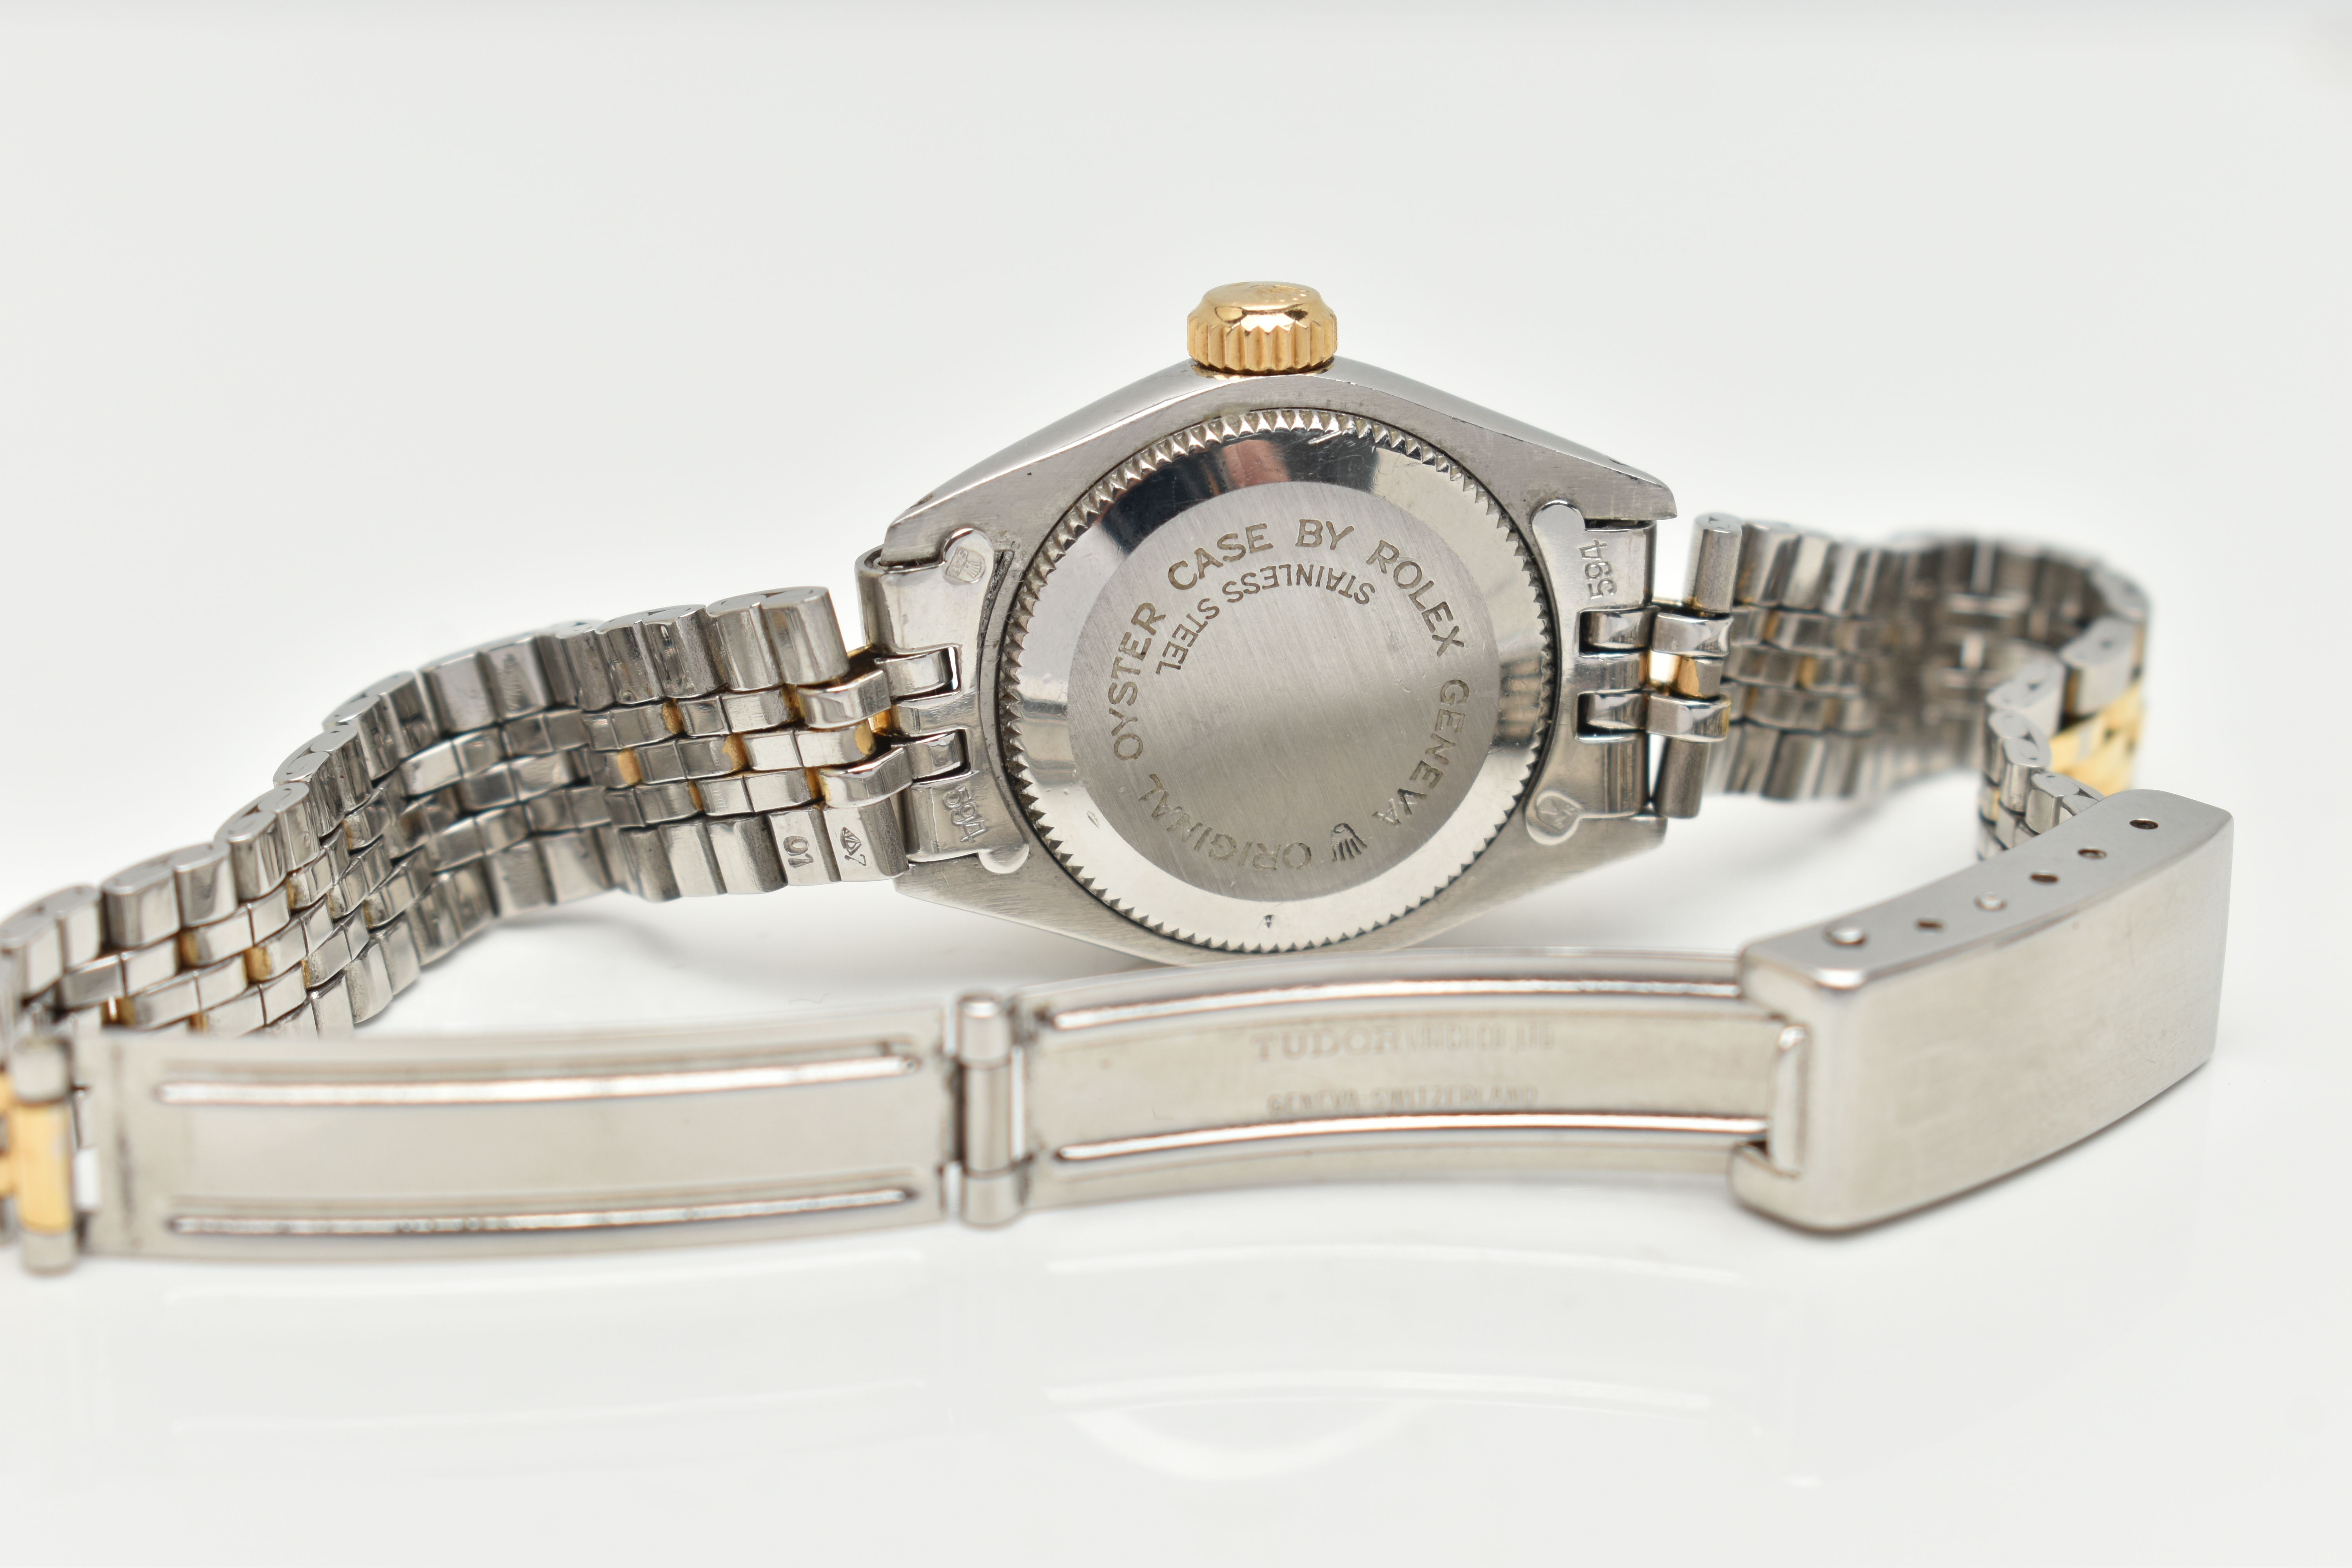 A LADYS 'TUDOR' WRISTWATCH, round gold dial signed 'Tudor Princess Oyster date, Rotor Self Winding', - Image 5 of 10